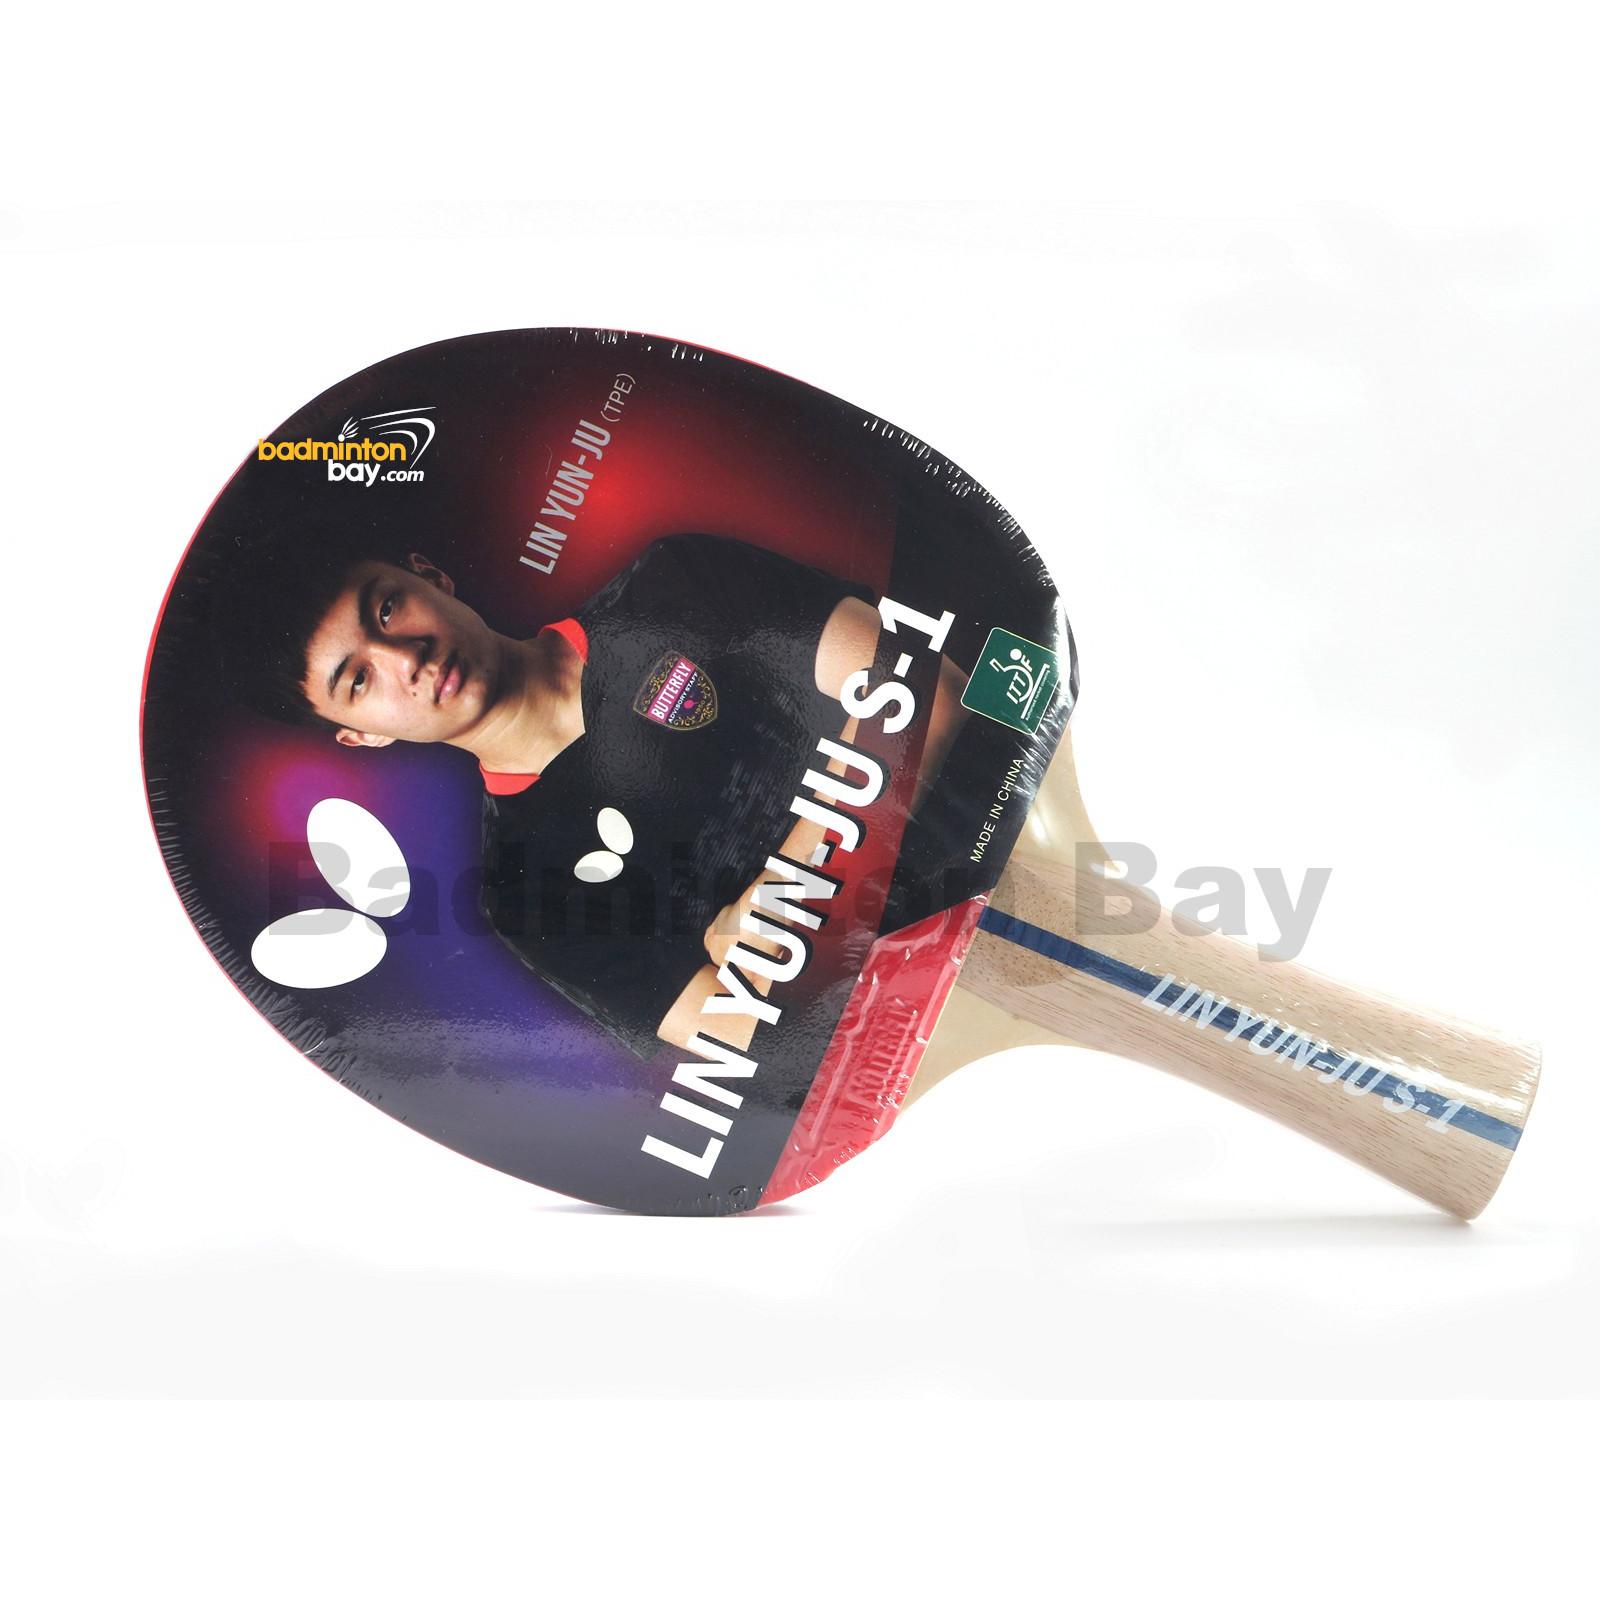 Recommended for Beginning Level Players International Table Tennis Federation Approved Max Control for Novice Players Butterfly Lin Yun-Ju CF2 Shakehand Table Tennis Racket Lin Yun-Ju Series 